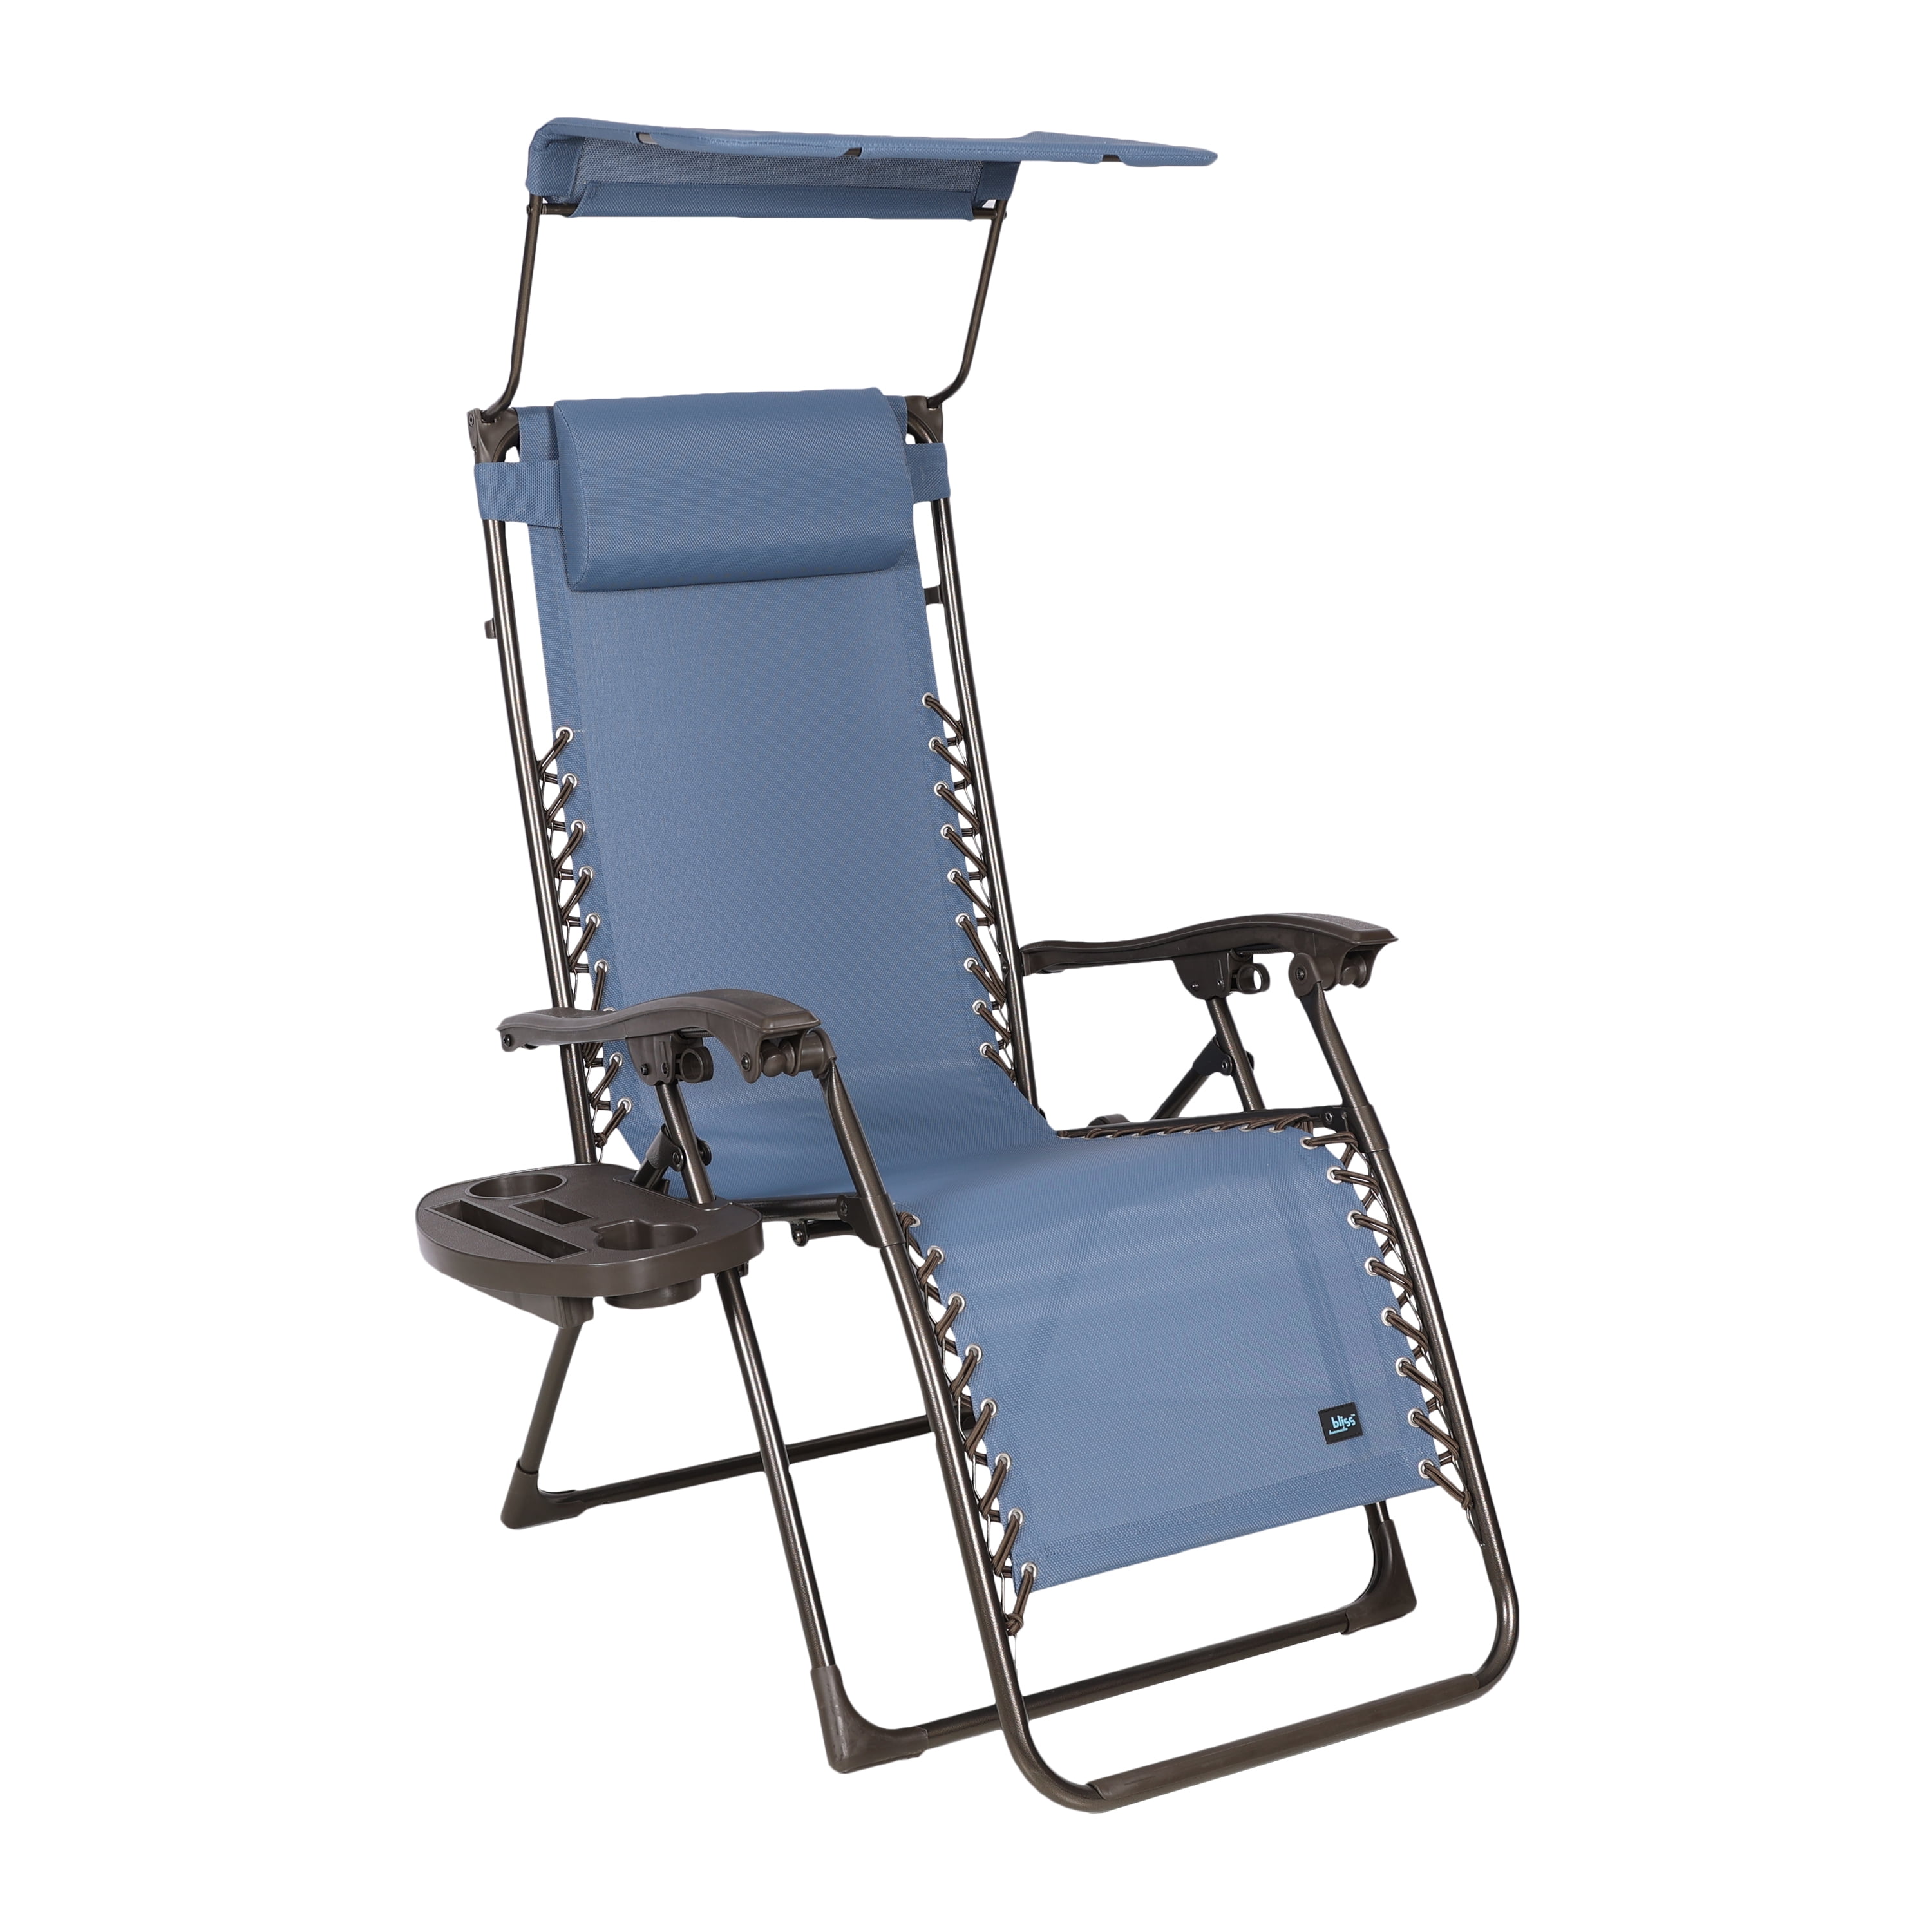 Zero Gravity Chair With Canopy For Outdoor Summer Pool Beach Lounge Light Blue 